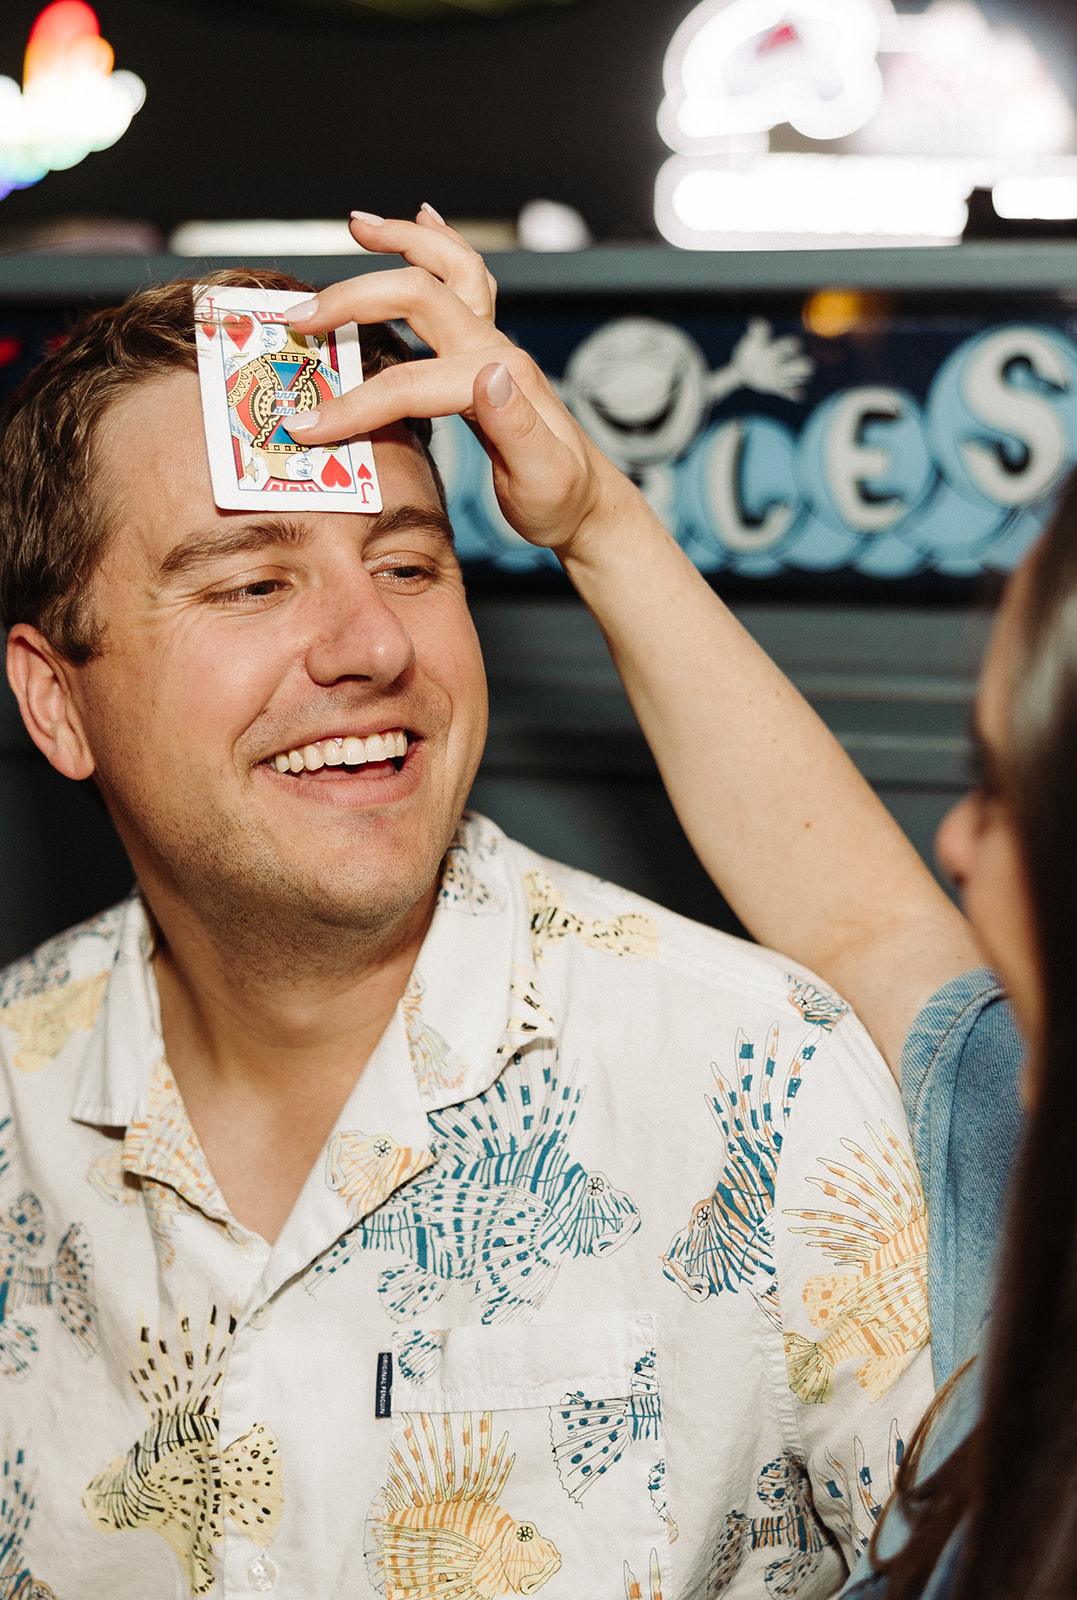 Woman places a playing card on her fiance's forehead while they play a card game at the arcade